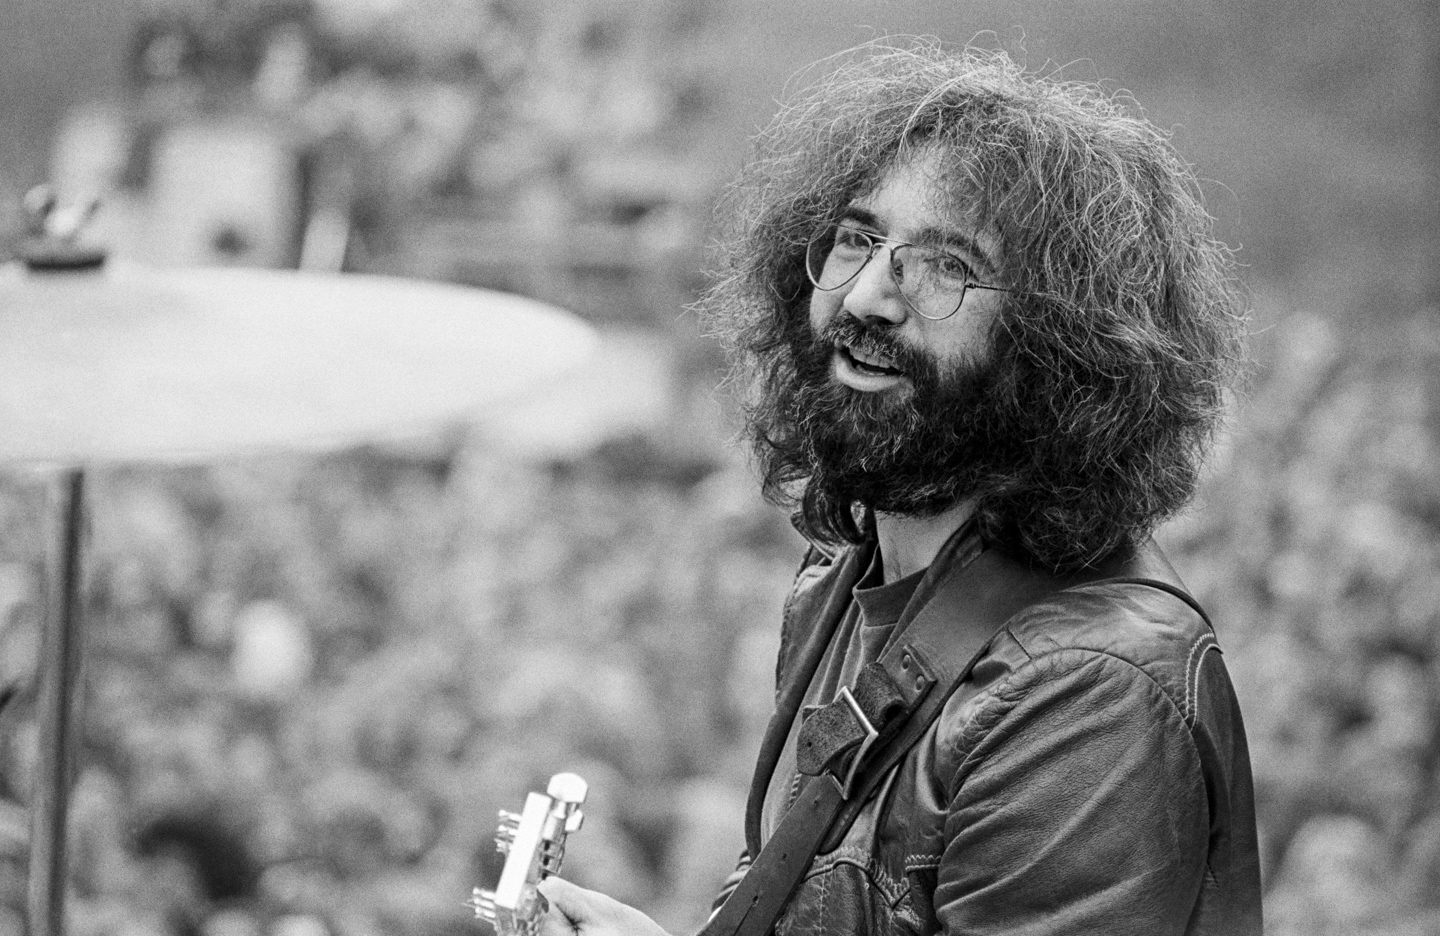 Prepare for ‘Jerry Day’ With These Historic Photos of the Late Grateful Dead Frontman